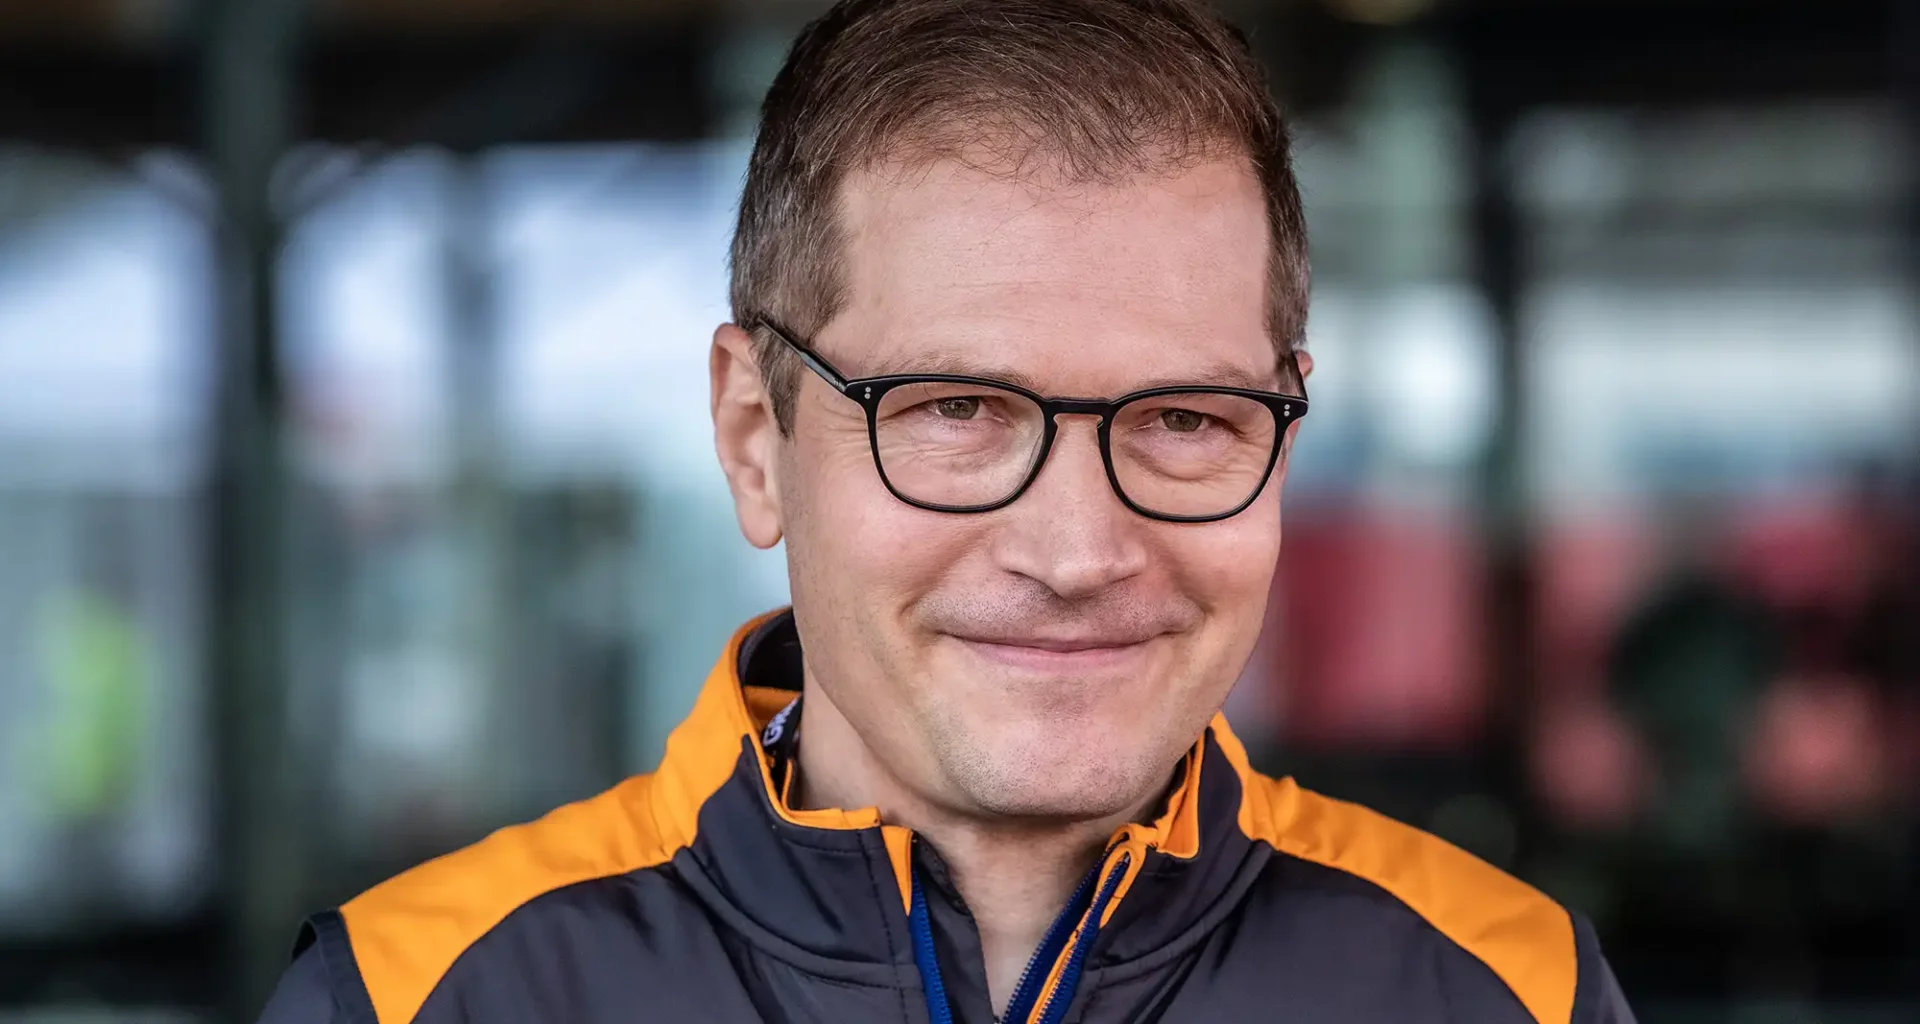 Andreas Seidl salary net worth forbes wealth houses cars investments